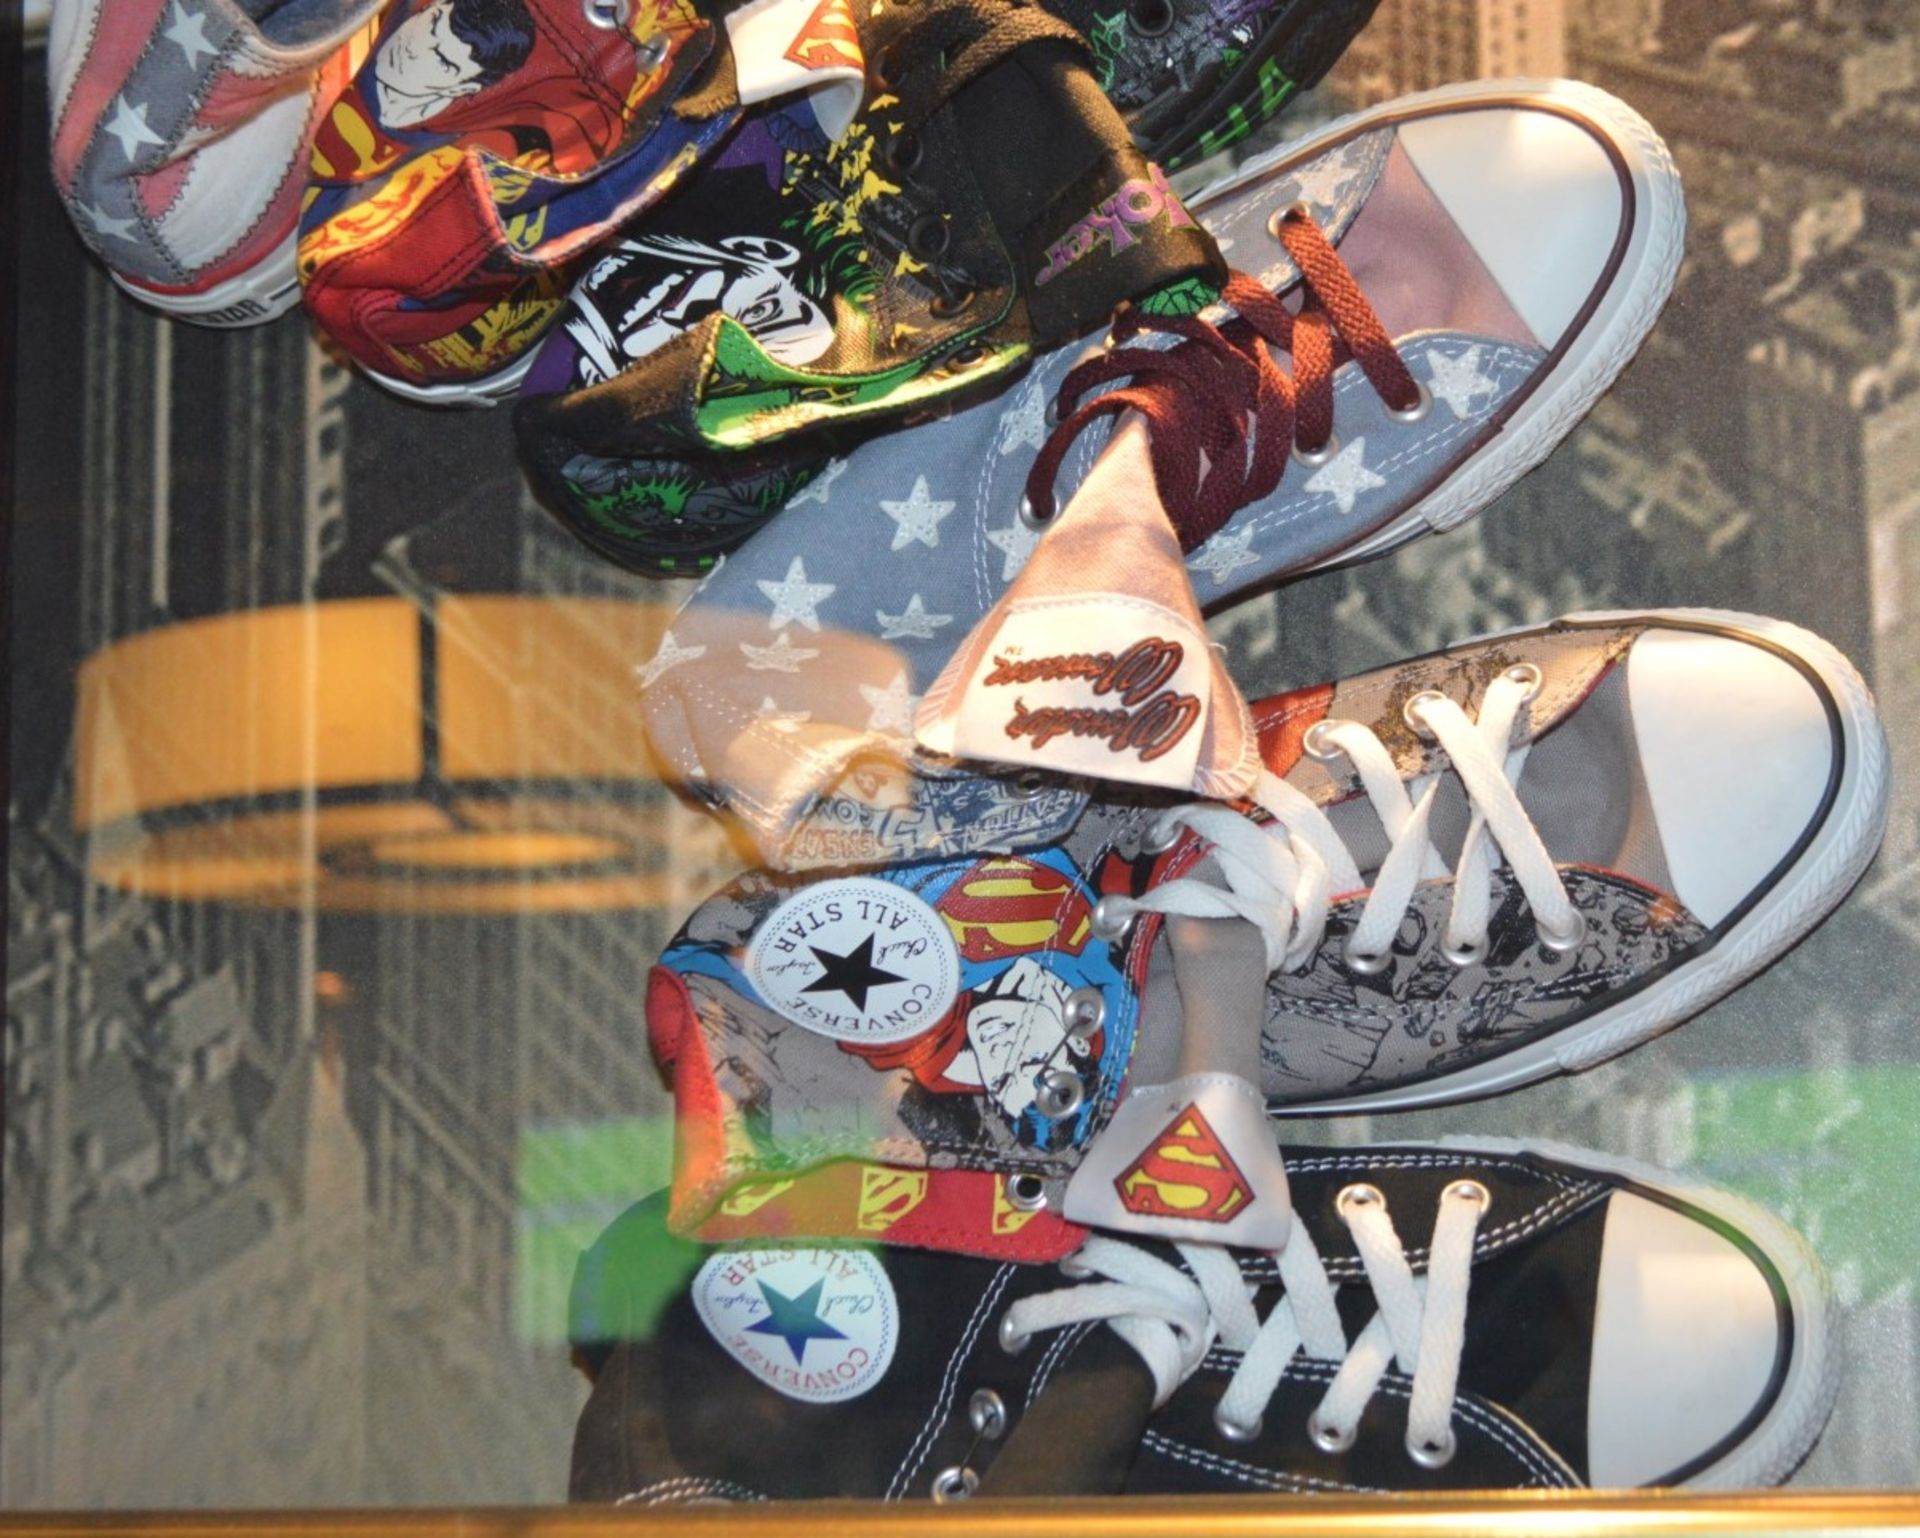 1 x Americana Wall Mounted Illuminated Display Case - NOVELTY CONVERSE SHOES - Includes Various - Image 3 of 6